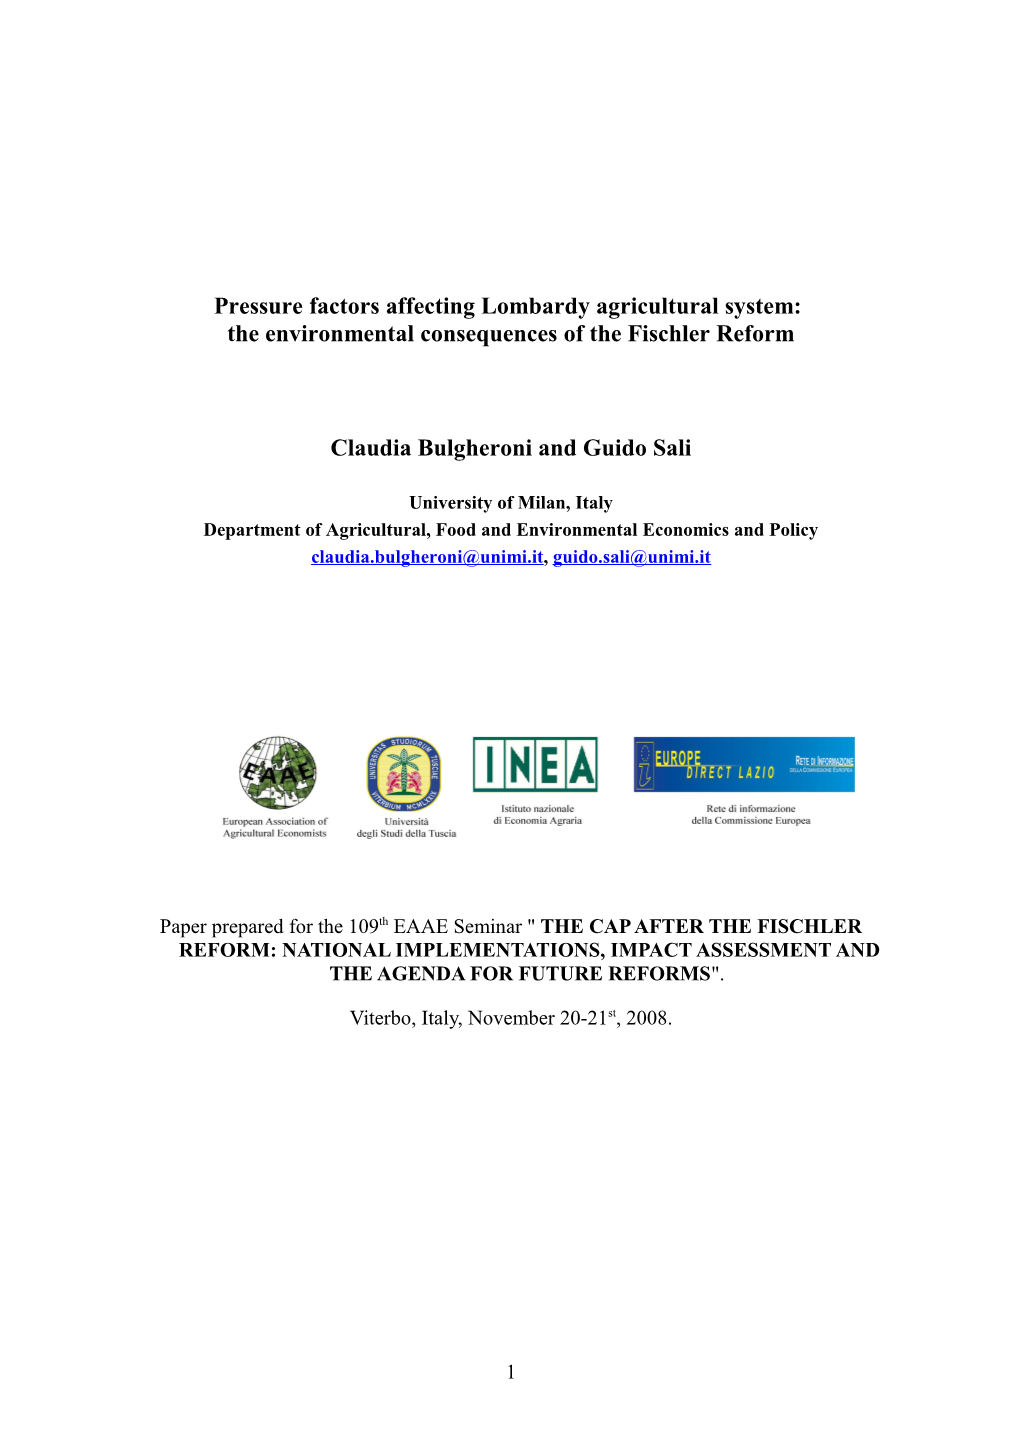 Pressure Factors Affecting Lombardy Agricultural System